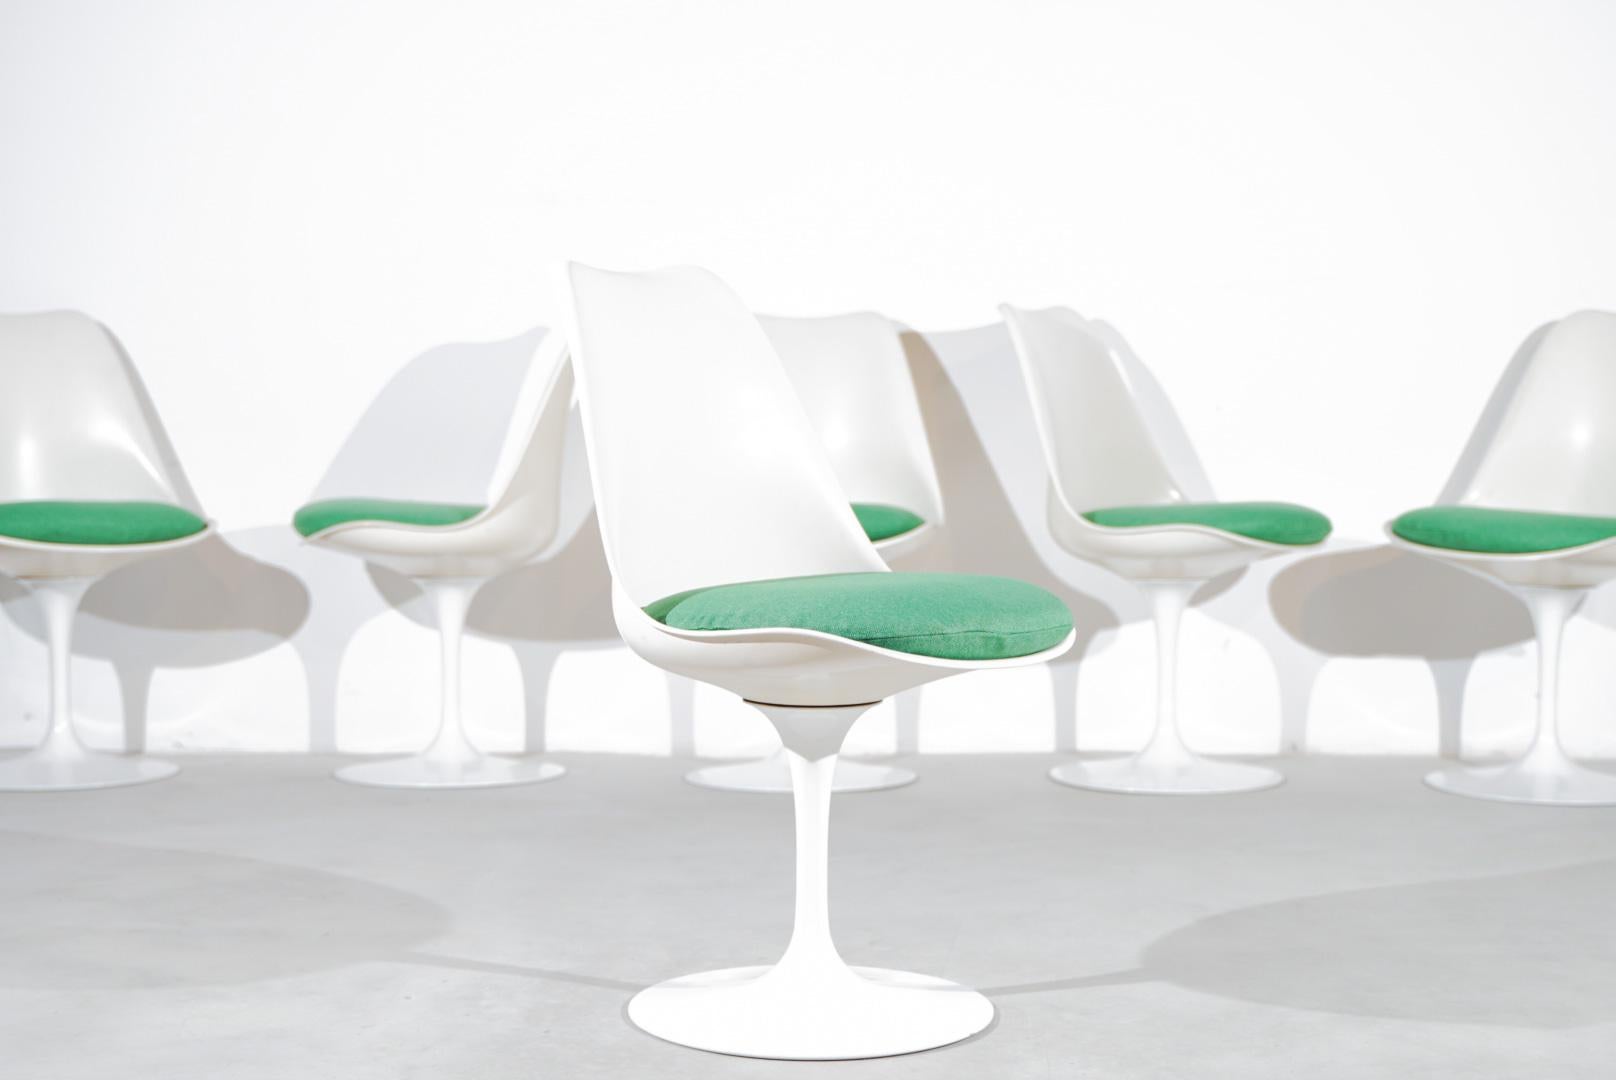 One of the Most famous designs of the mid Century. The tulip seriesClassic Tulip dining chairs designed in 1956 by Eero Saarinen for Knoll International. A defining accomplishment of modern design and a timeless addition to your home—a true Classic.